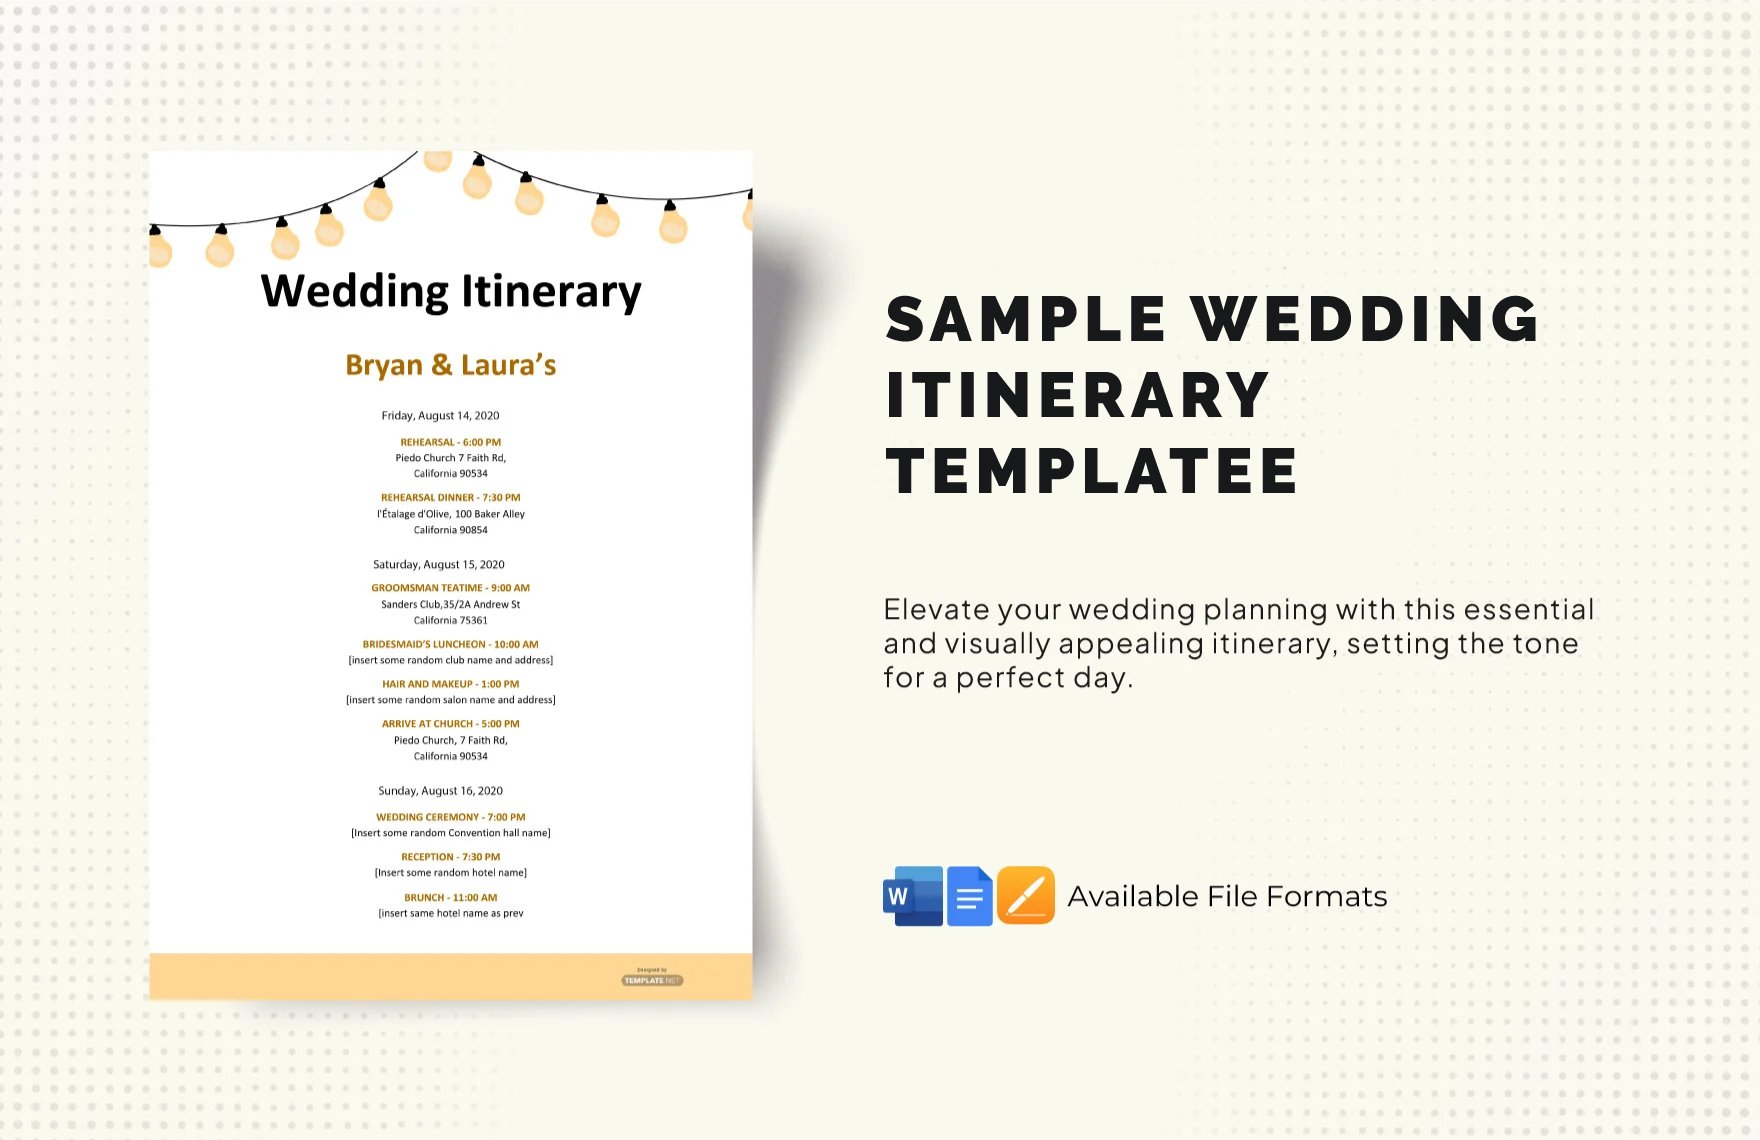 Free Sample Wedding Itinerary Template in Word, Google Docs, Apple Pages